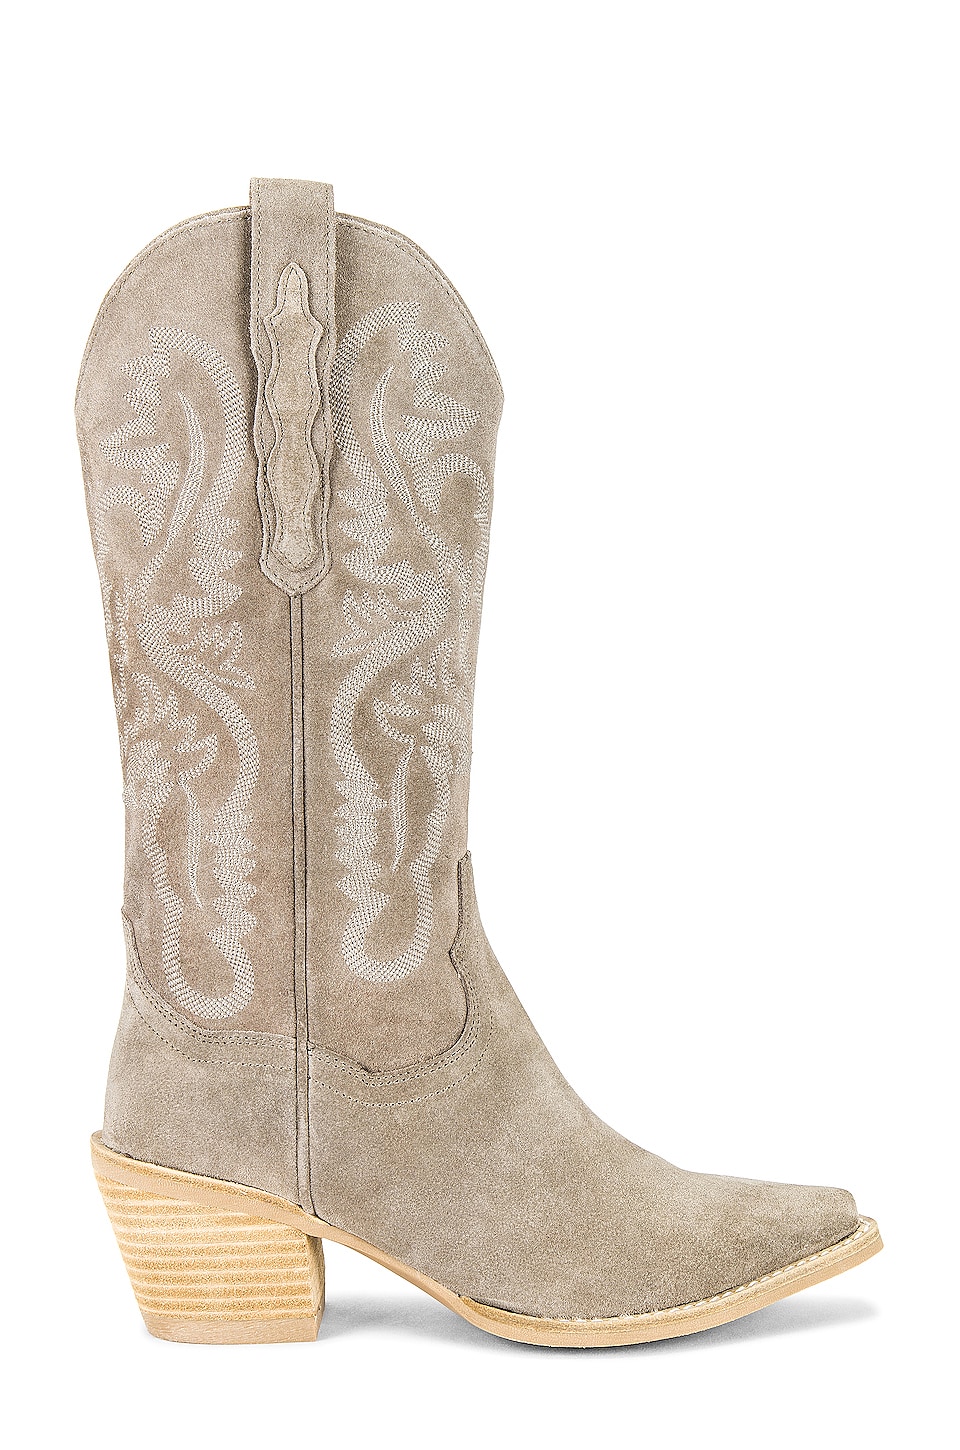 Jeffrey Campbell Dagget Boot in Taupe Suede | REVOLVE